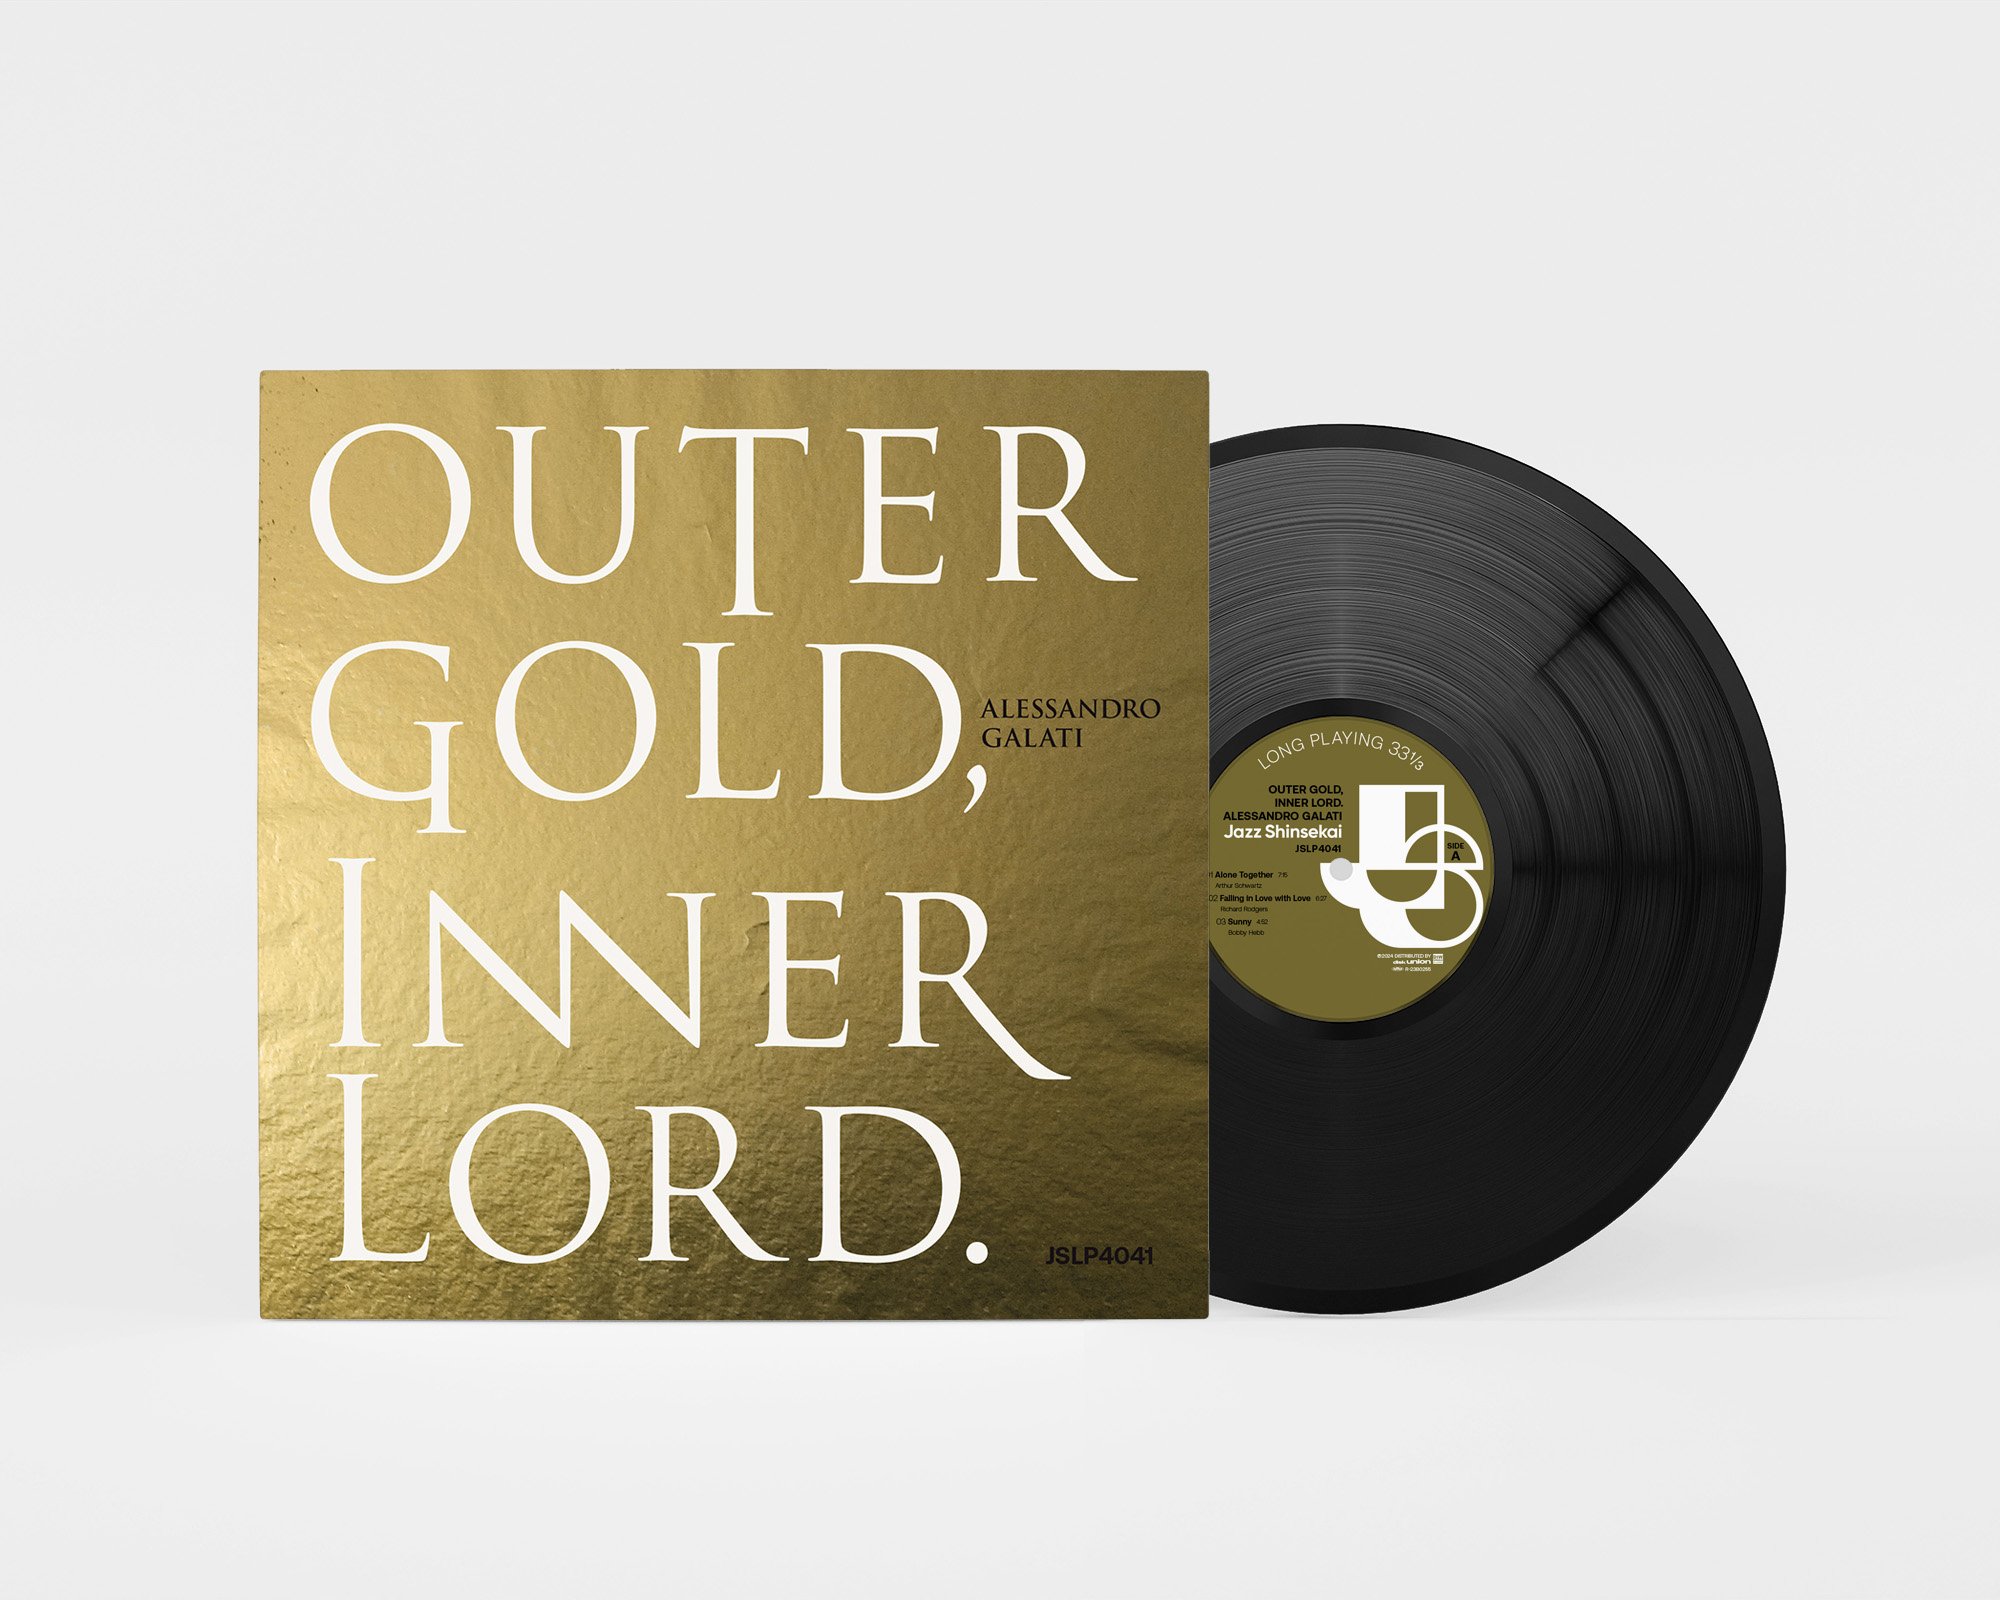 JSLP4041 ALESSANDRO GALATI - OUTER GOLD, INNER LORD.